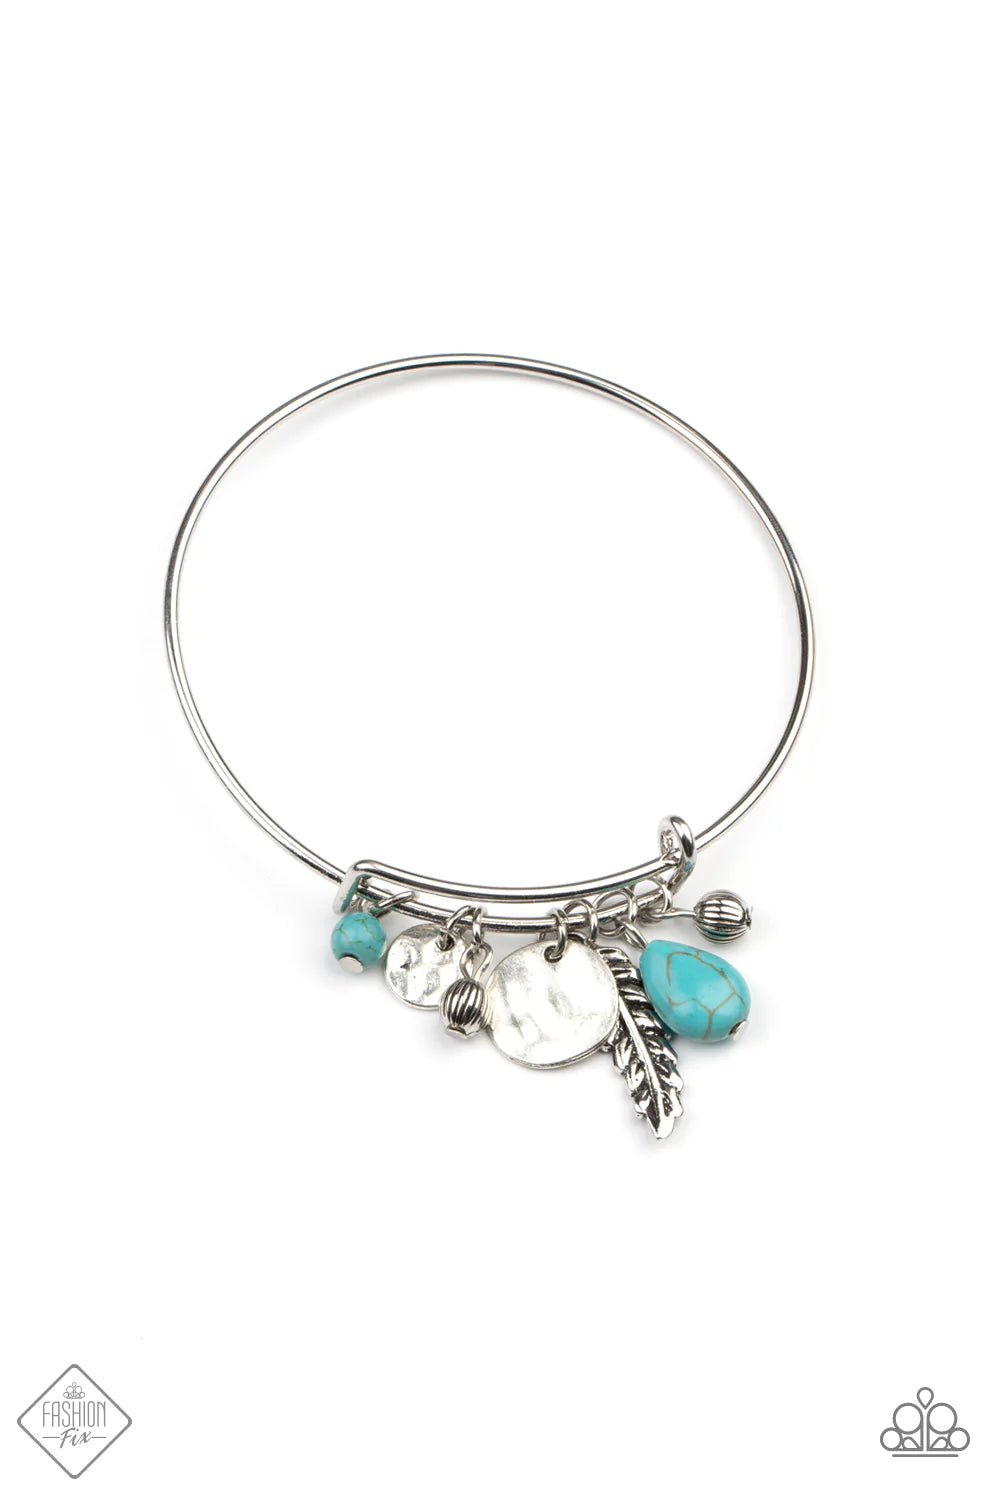 Root and RANCH - Blue (Turquoise) Bracelet (SSF-0521)